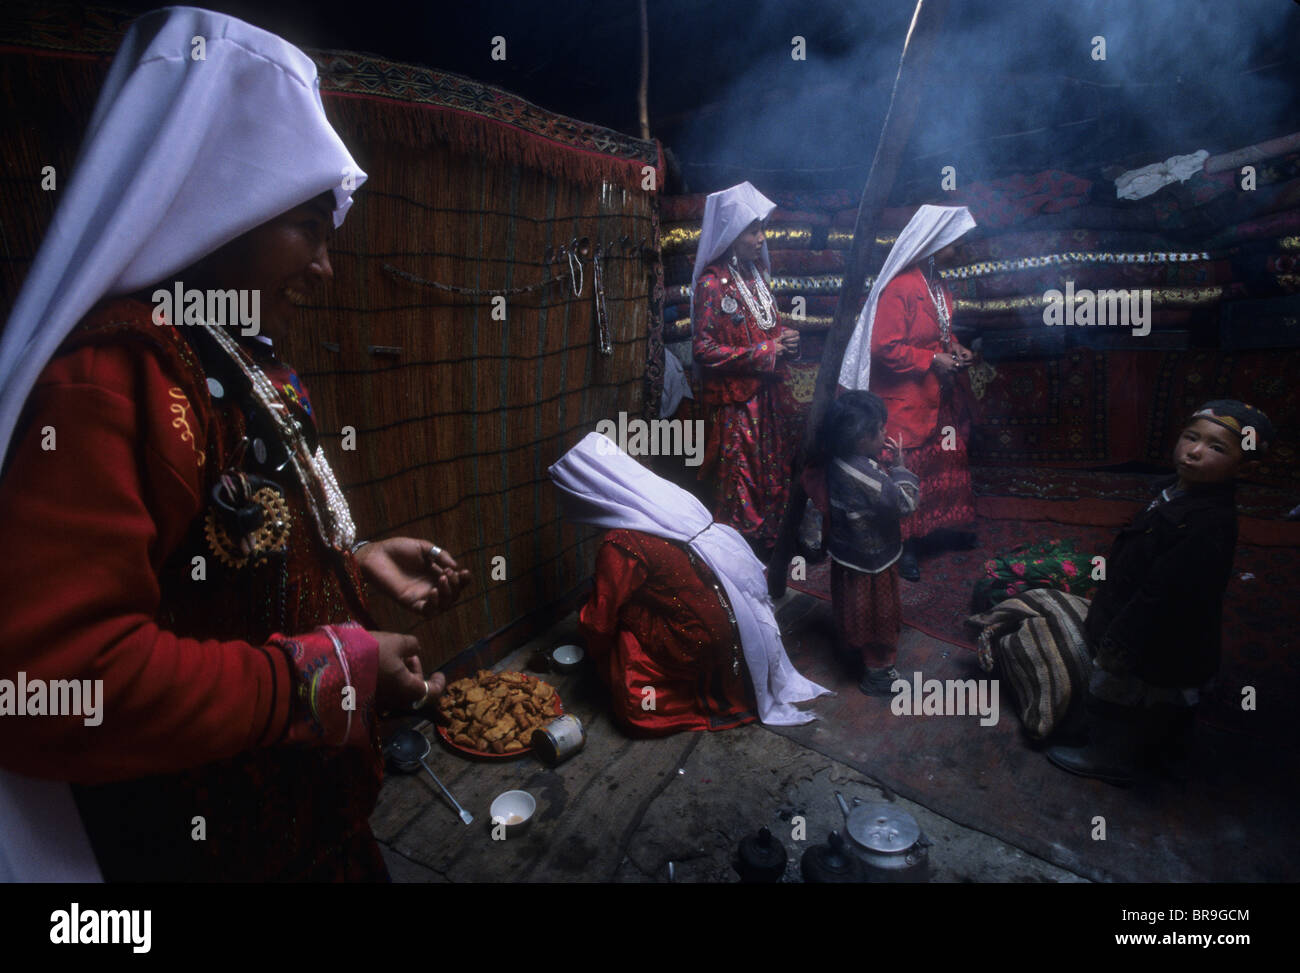 Kyrgyz women in traditional dress do chores inside a yurt at a nomad camp in the Little Pamirs Wakhan Corridor. Stock Photo